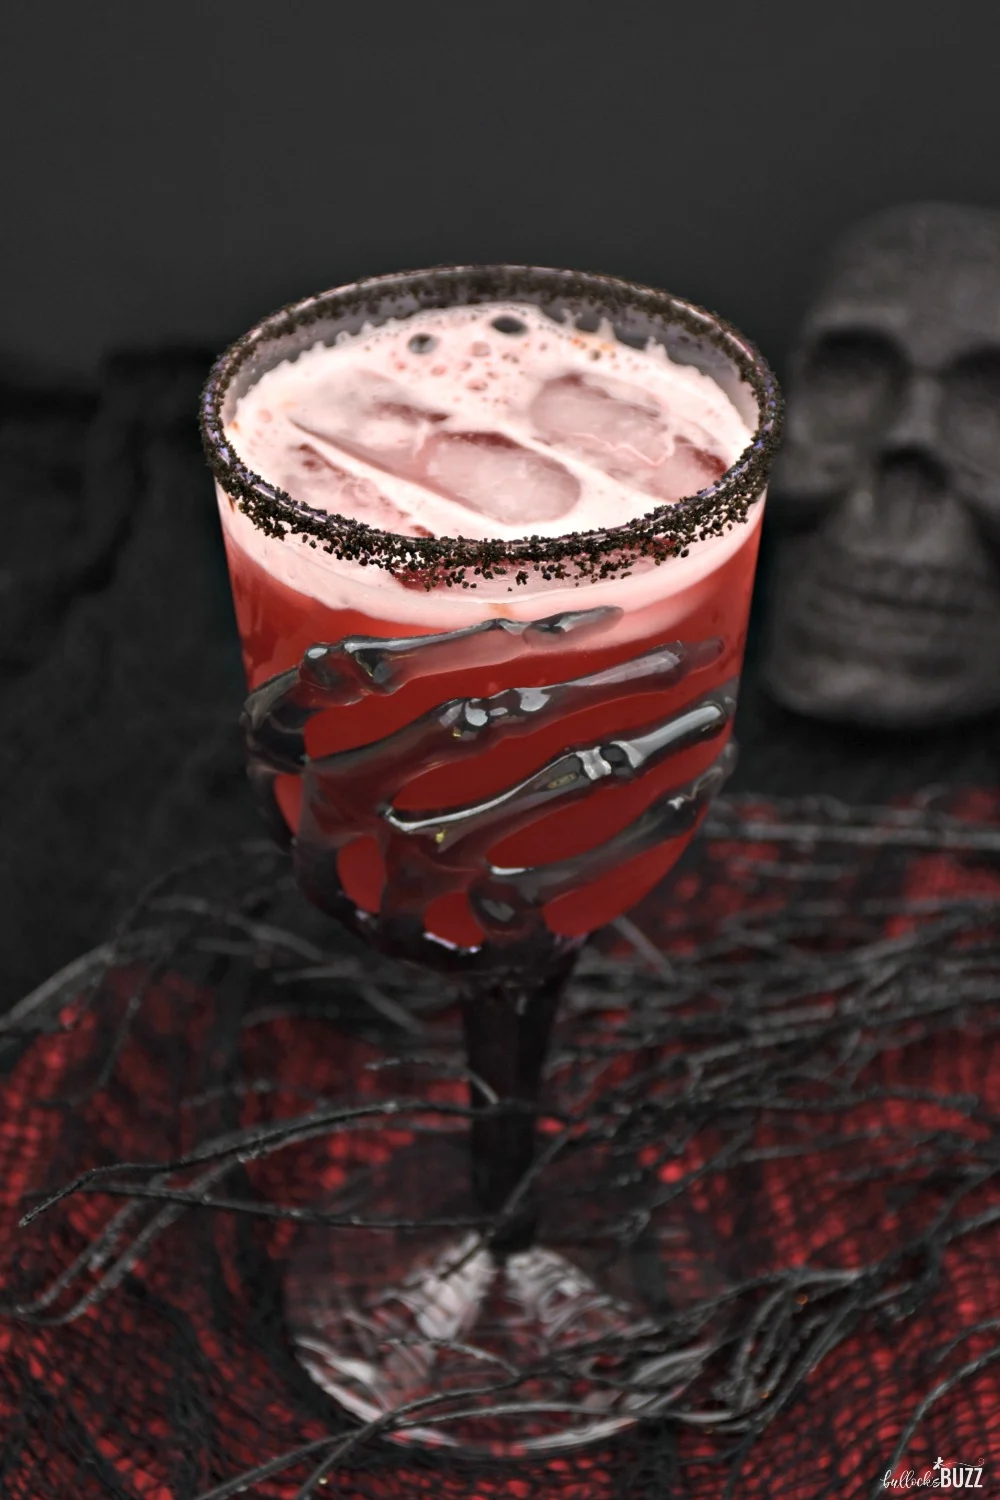 This Vampire's Kiss cocktail is hauntingly easy to make. It requires just a few simple ingredients including cranberry juice, spiced rum, pineapple juice, and a splash of grenadine.